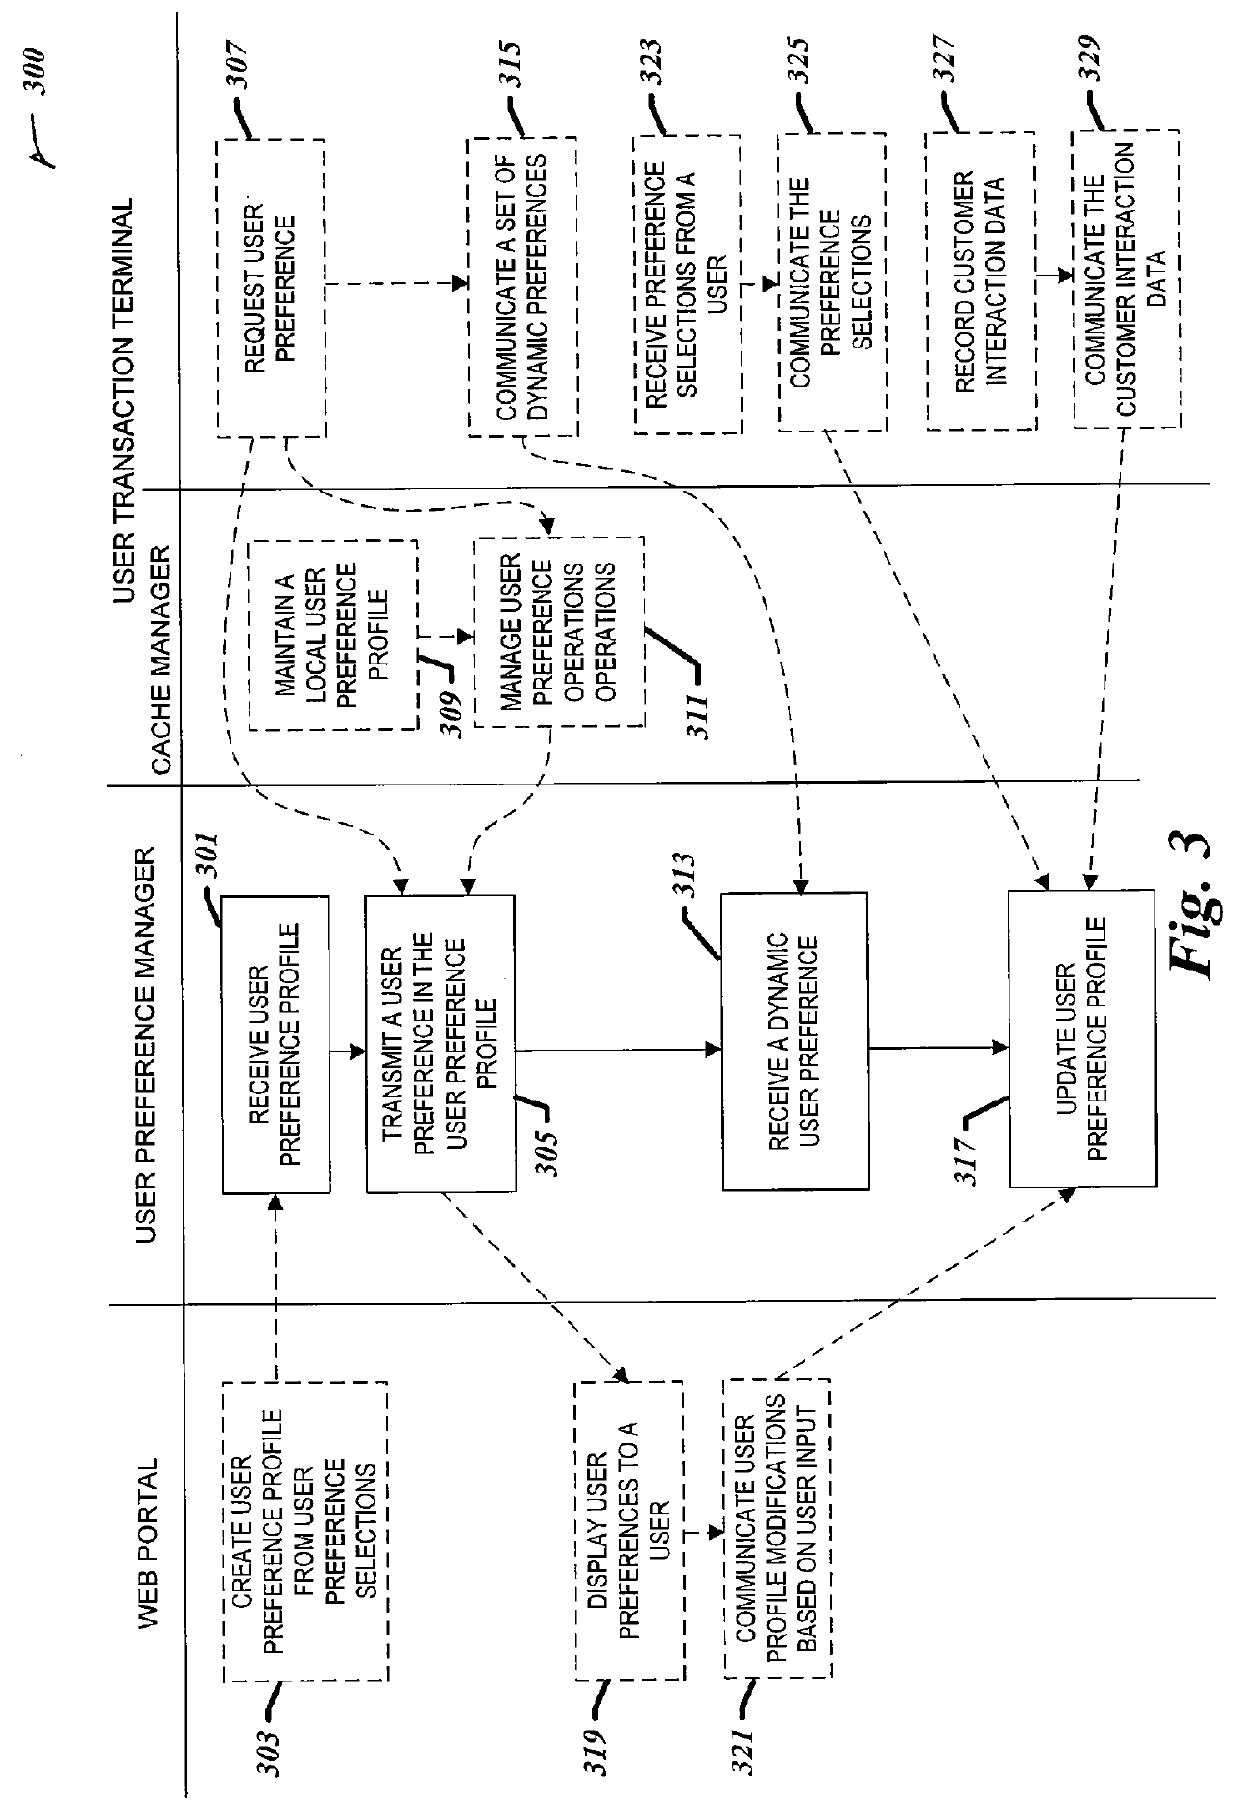 Centralized user preference management for electronic decision making devices